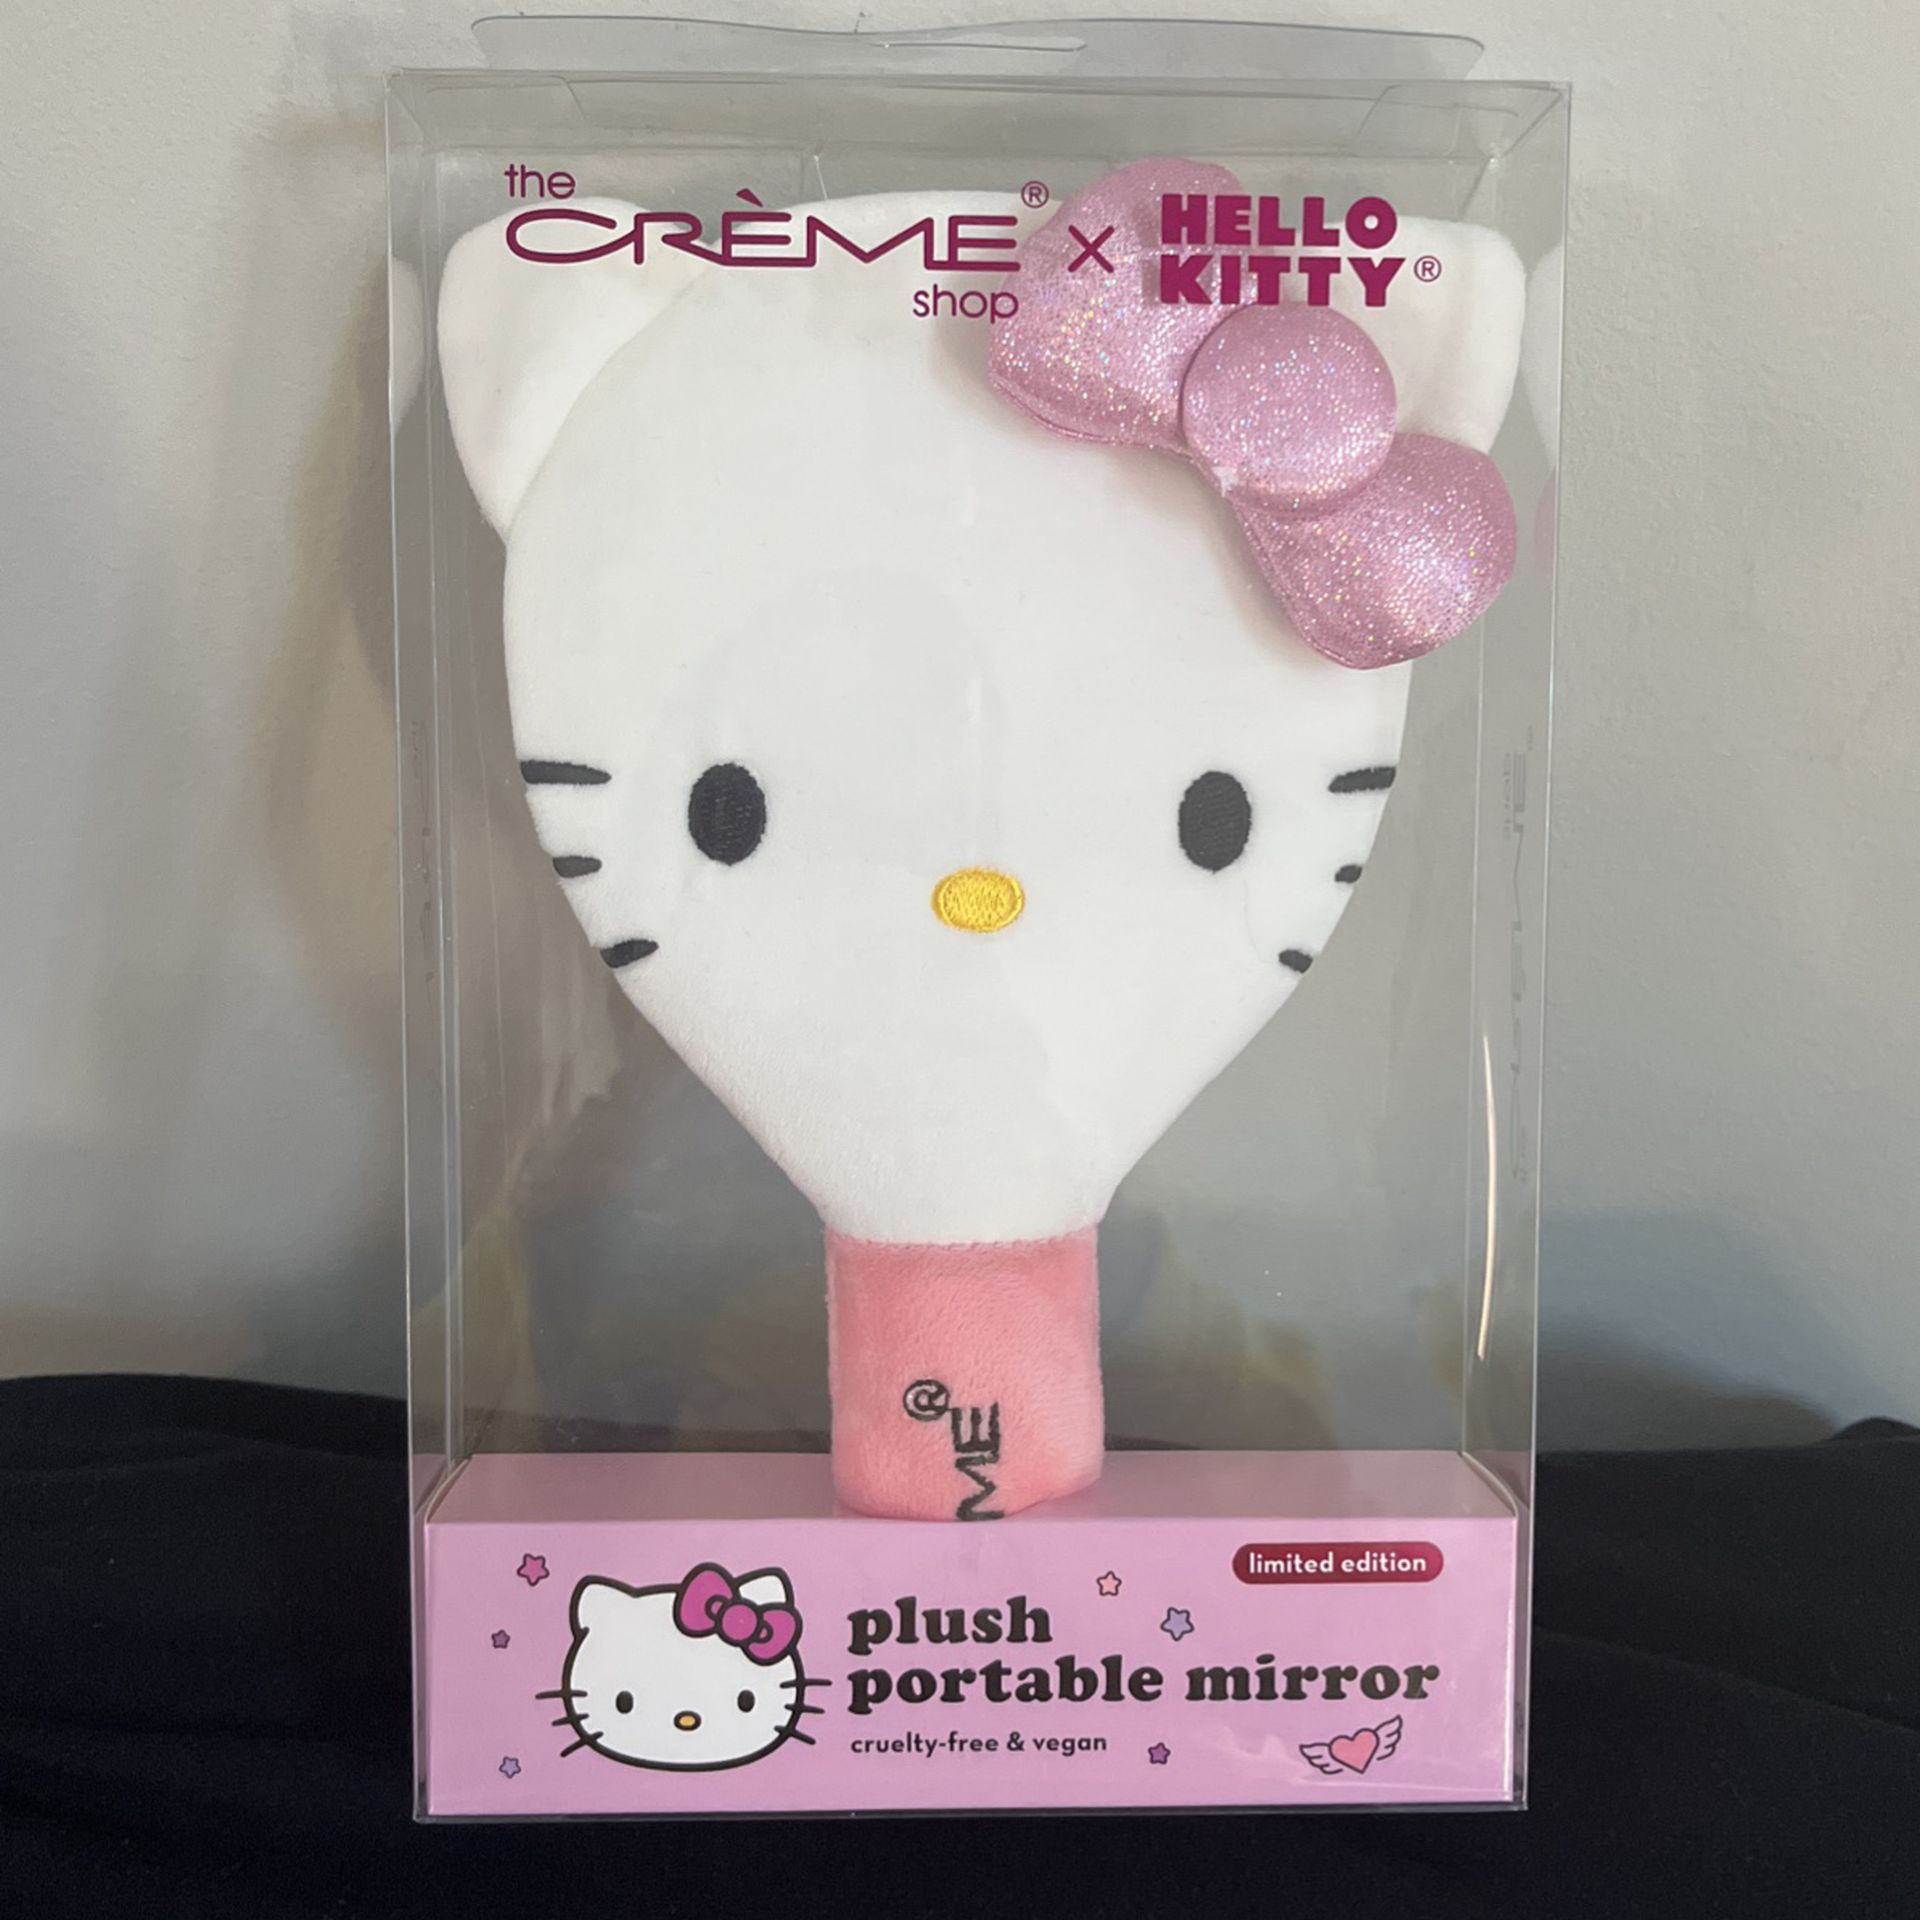 [ New ] The Creme Shop Hello Kitty Plush portable Mirror Limited Edition Makeup